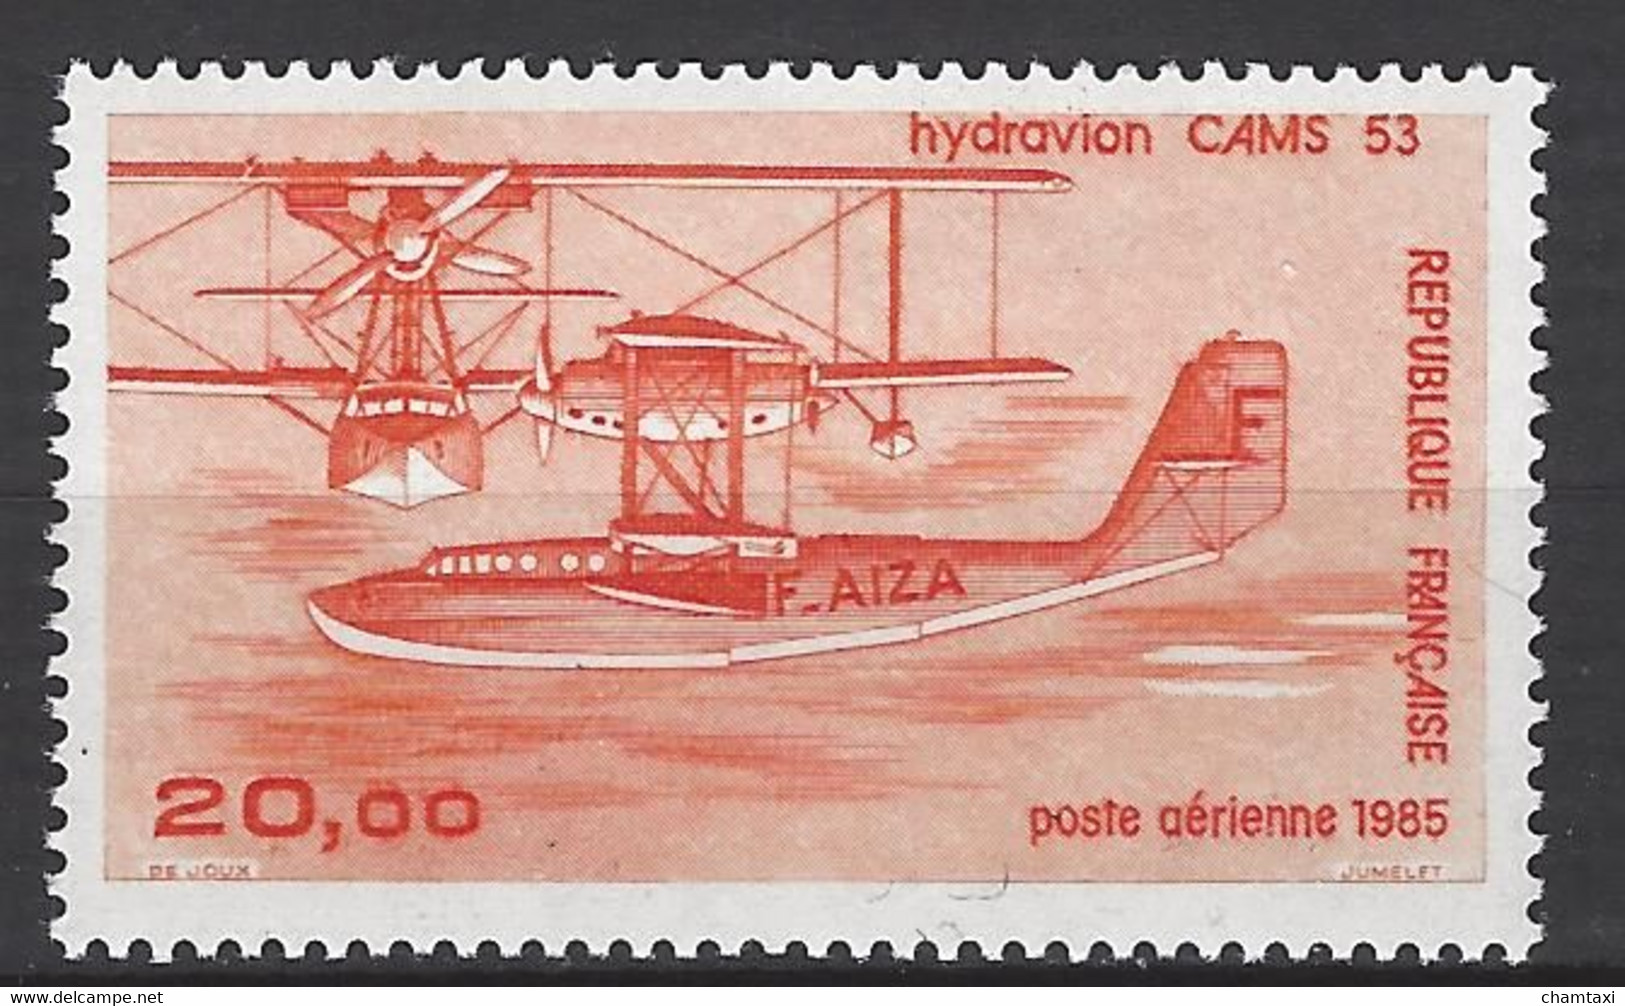 FRANCE 1895 TIMBRE POSTE AERIENNE 58b HYDRAVION CAMS 53 - Airmail